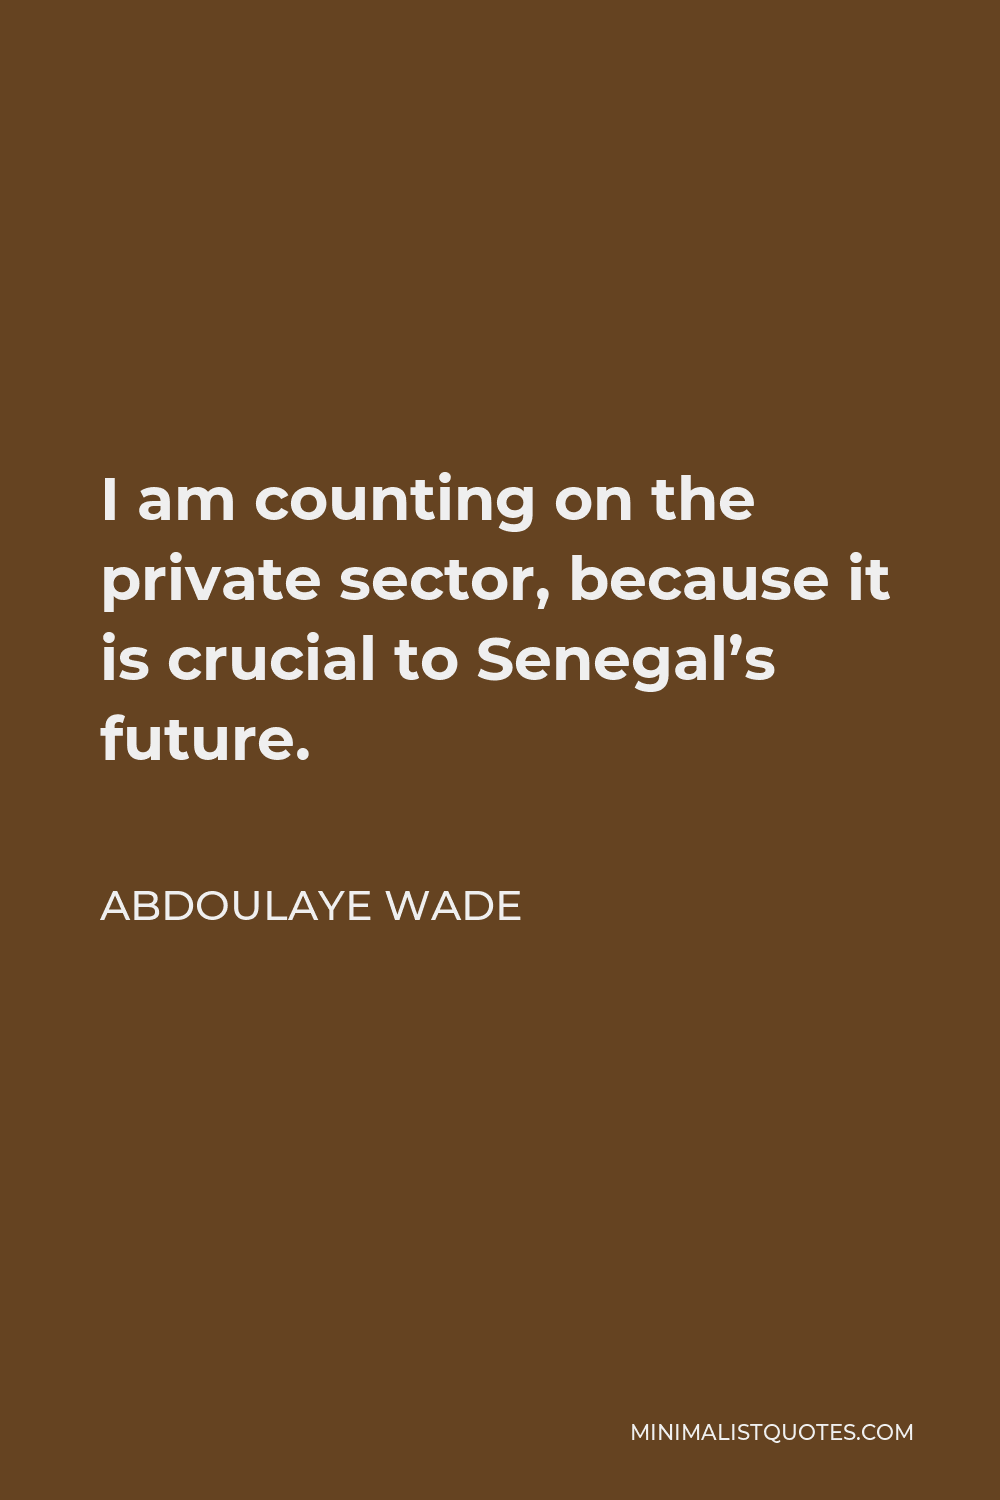 Abdoulaye Wade Quote - I am counting on the private sector, because it is crucial to Senegal’s future.